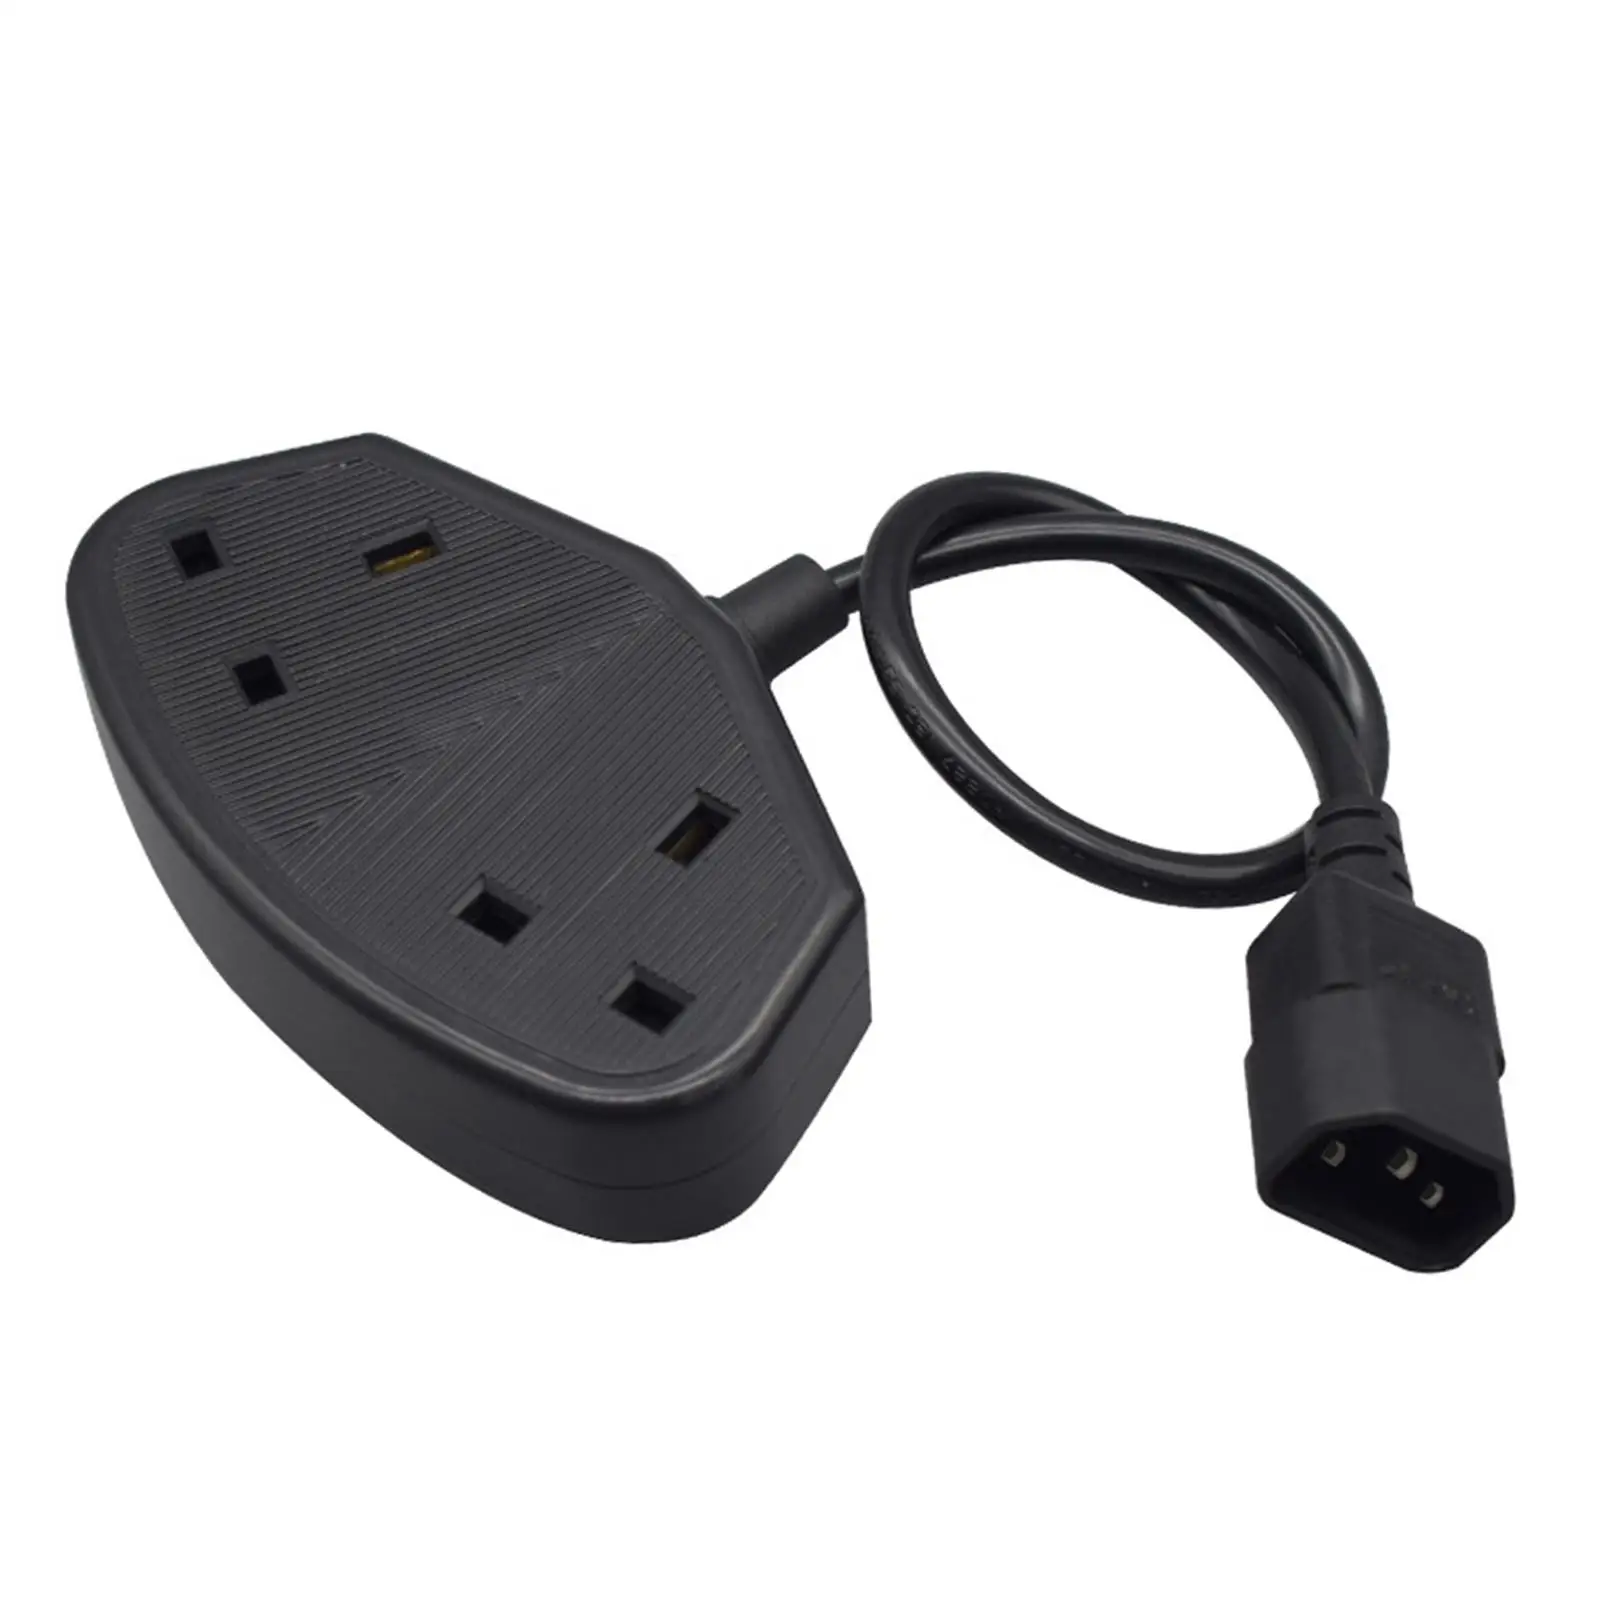 IEC320 C14 to Dual UK Power Cable Power Adapter Splitter Durable Repl ement Computer 2500W 125-250V 10A 30cm Cord   Power Cord